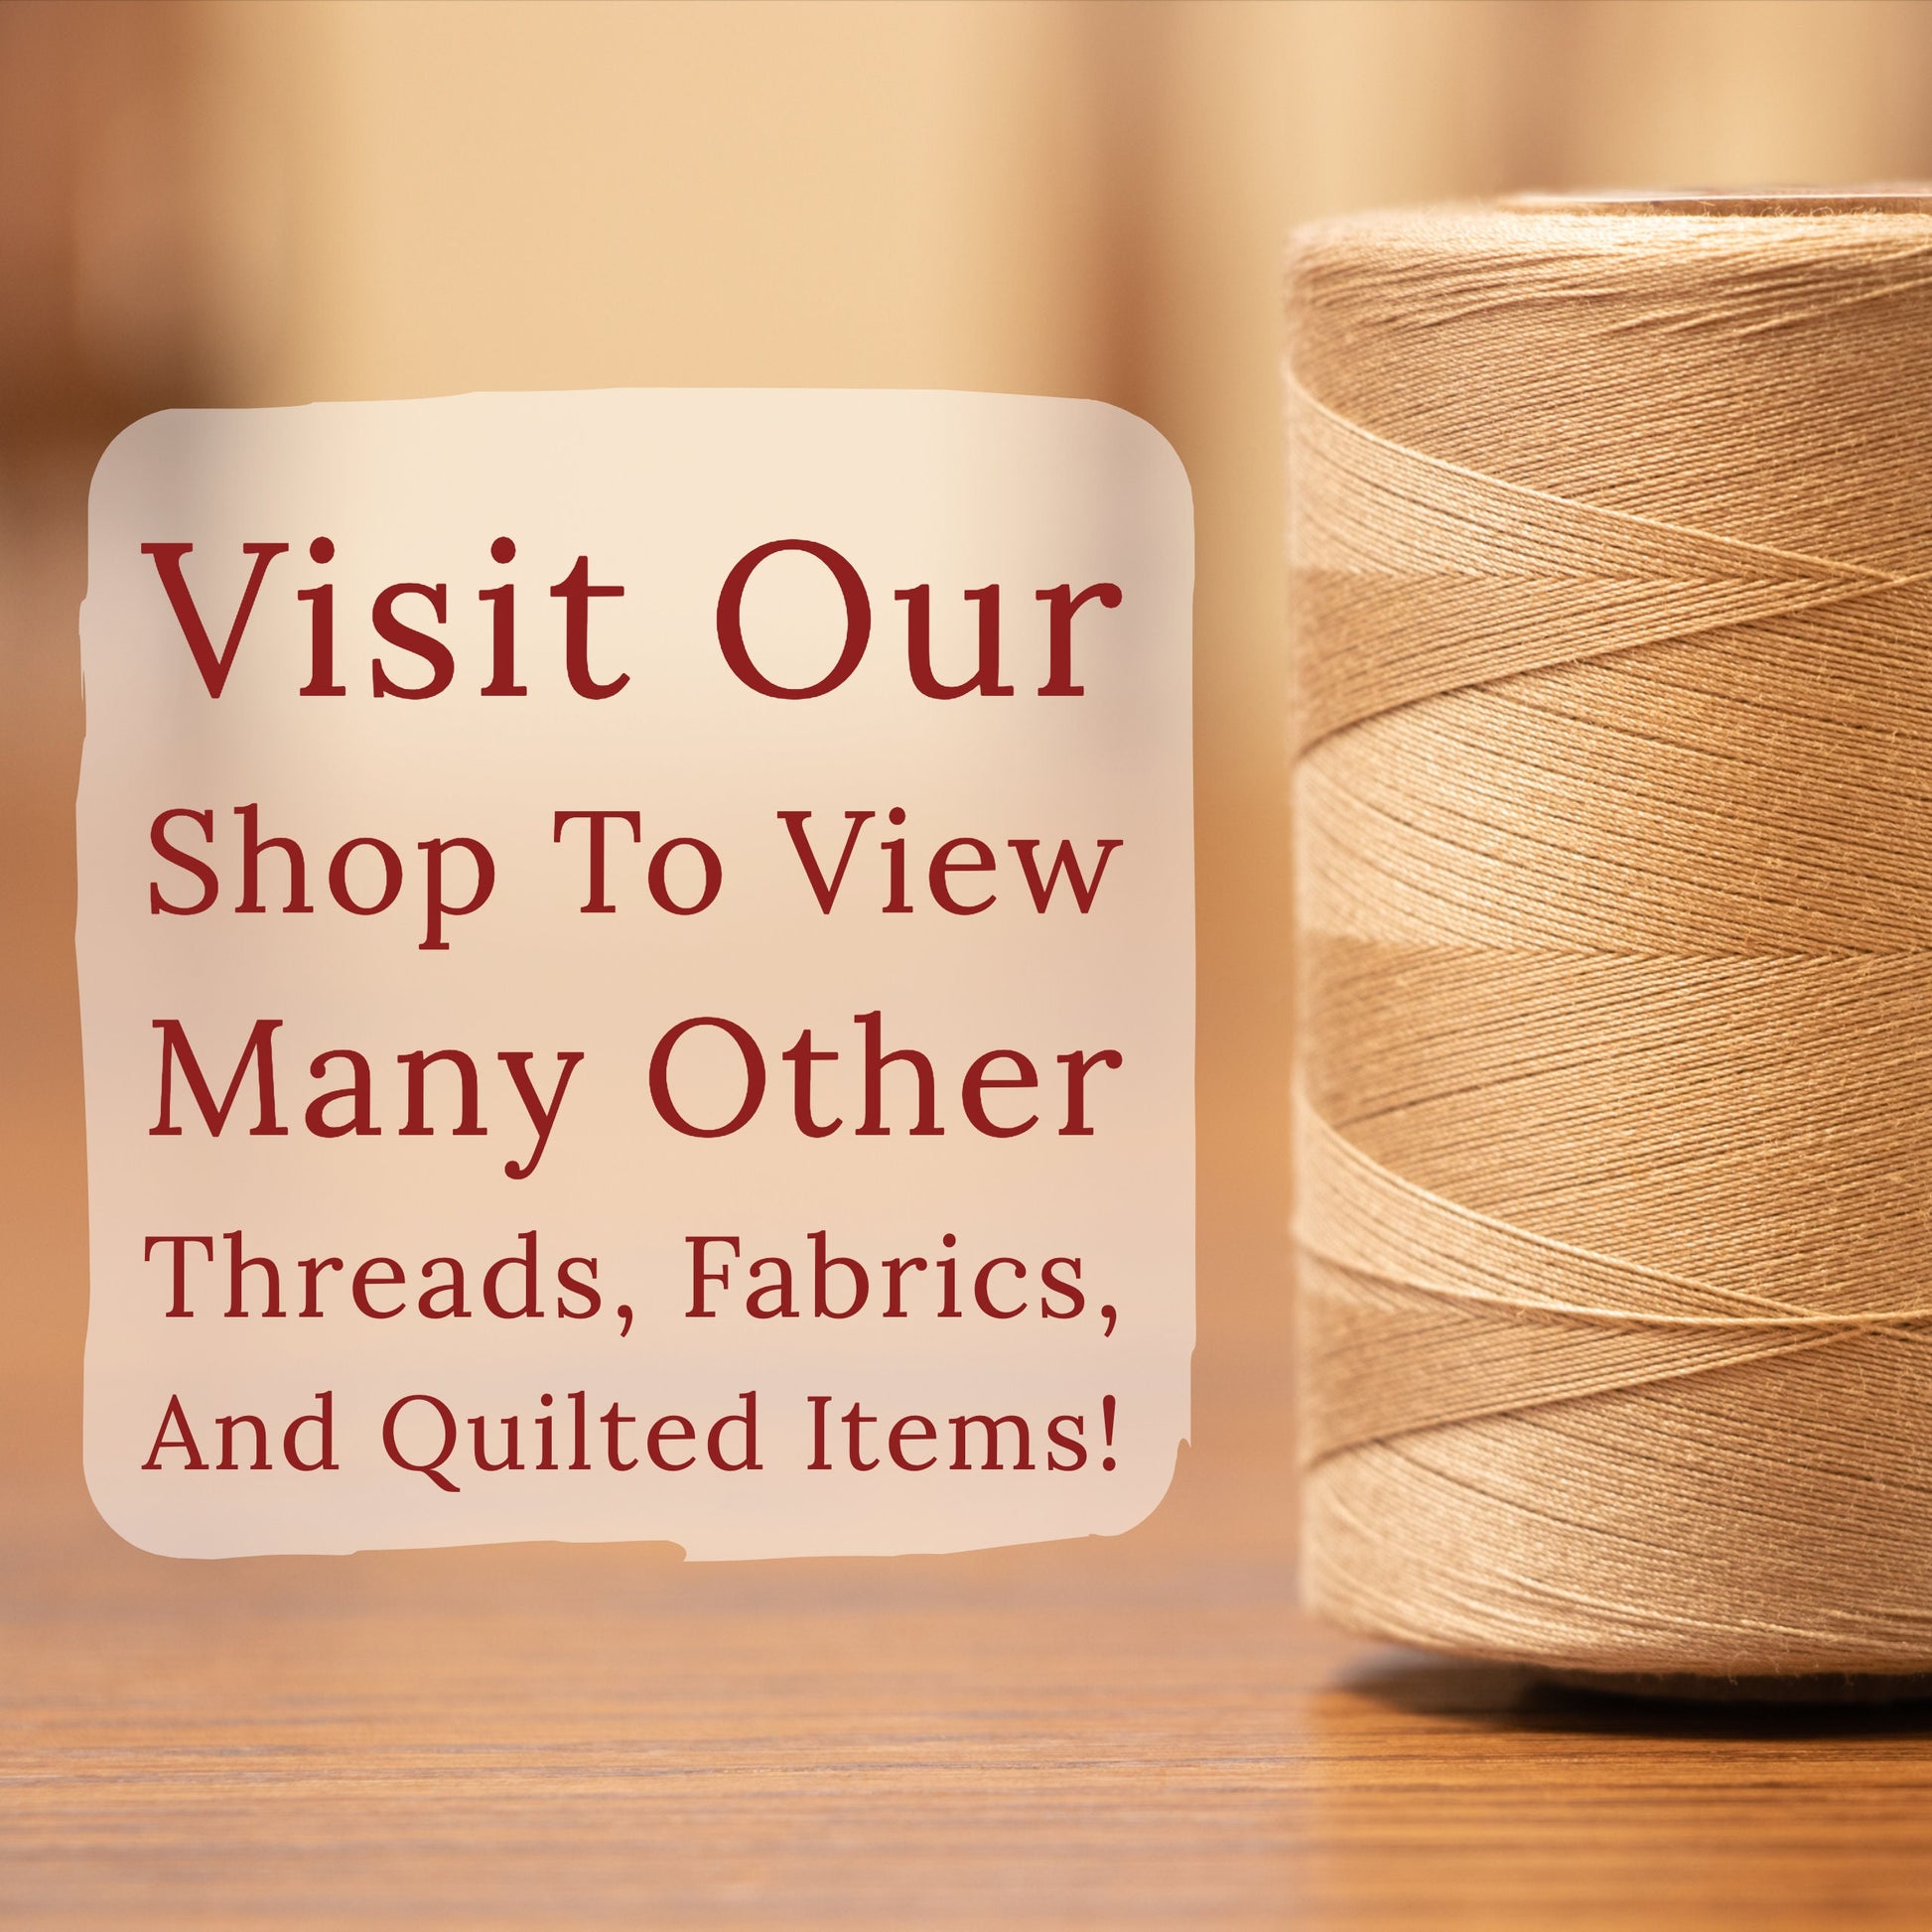 Star Coats and Clark Cotton Thread For Sewing, Machine Quilting & Craf –  Farmhouse Quilting Co